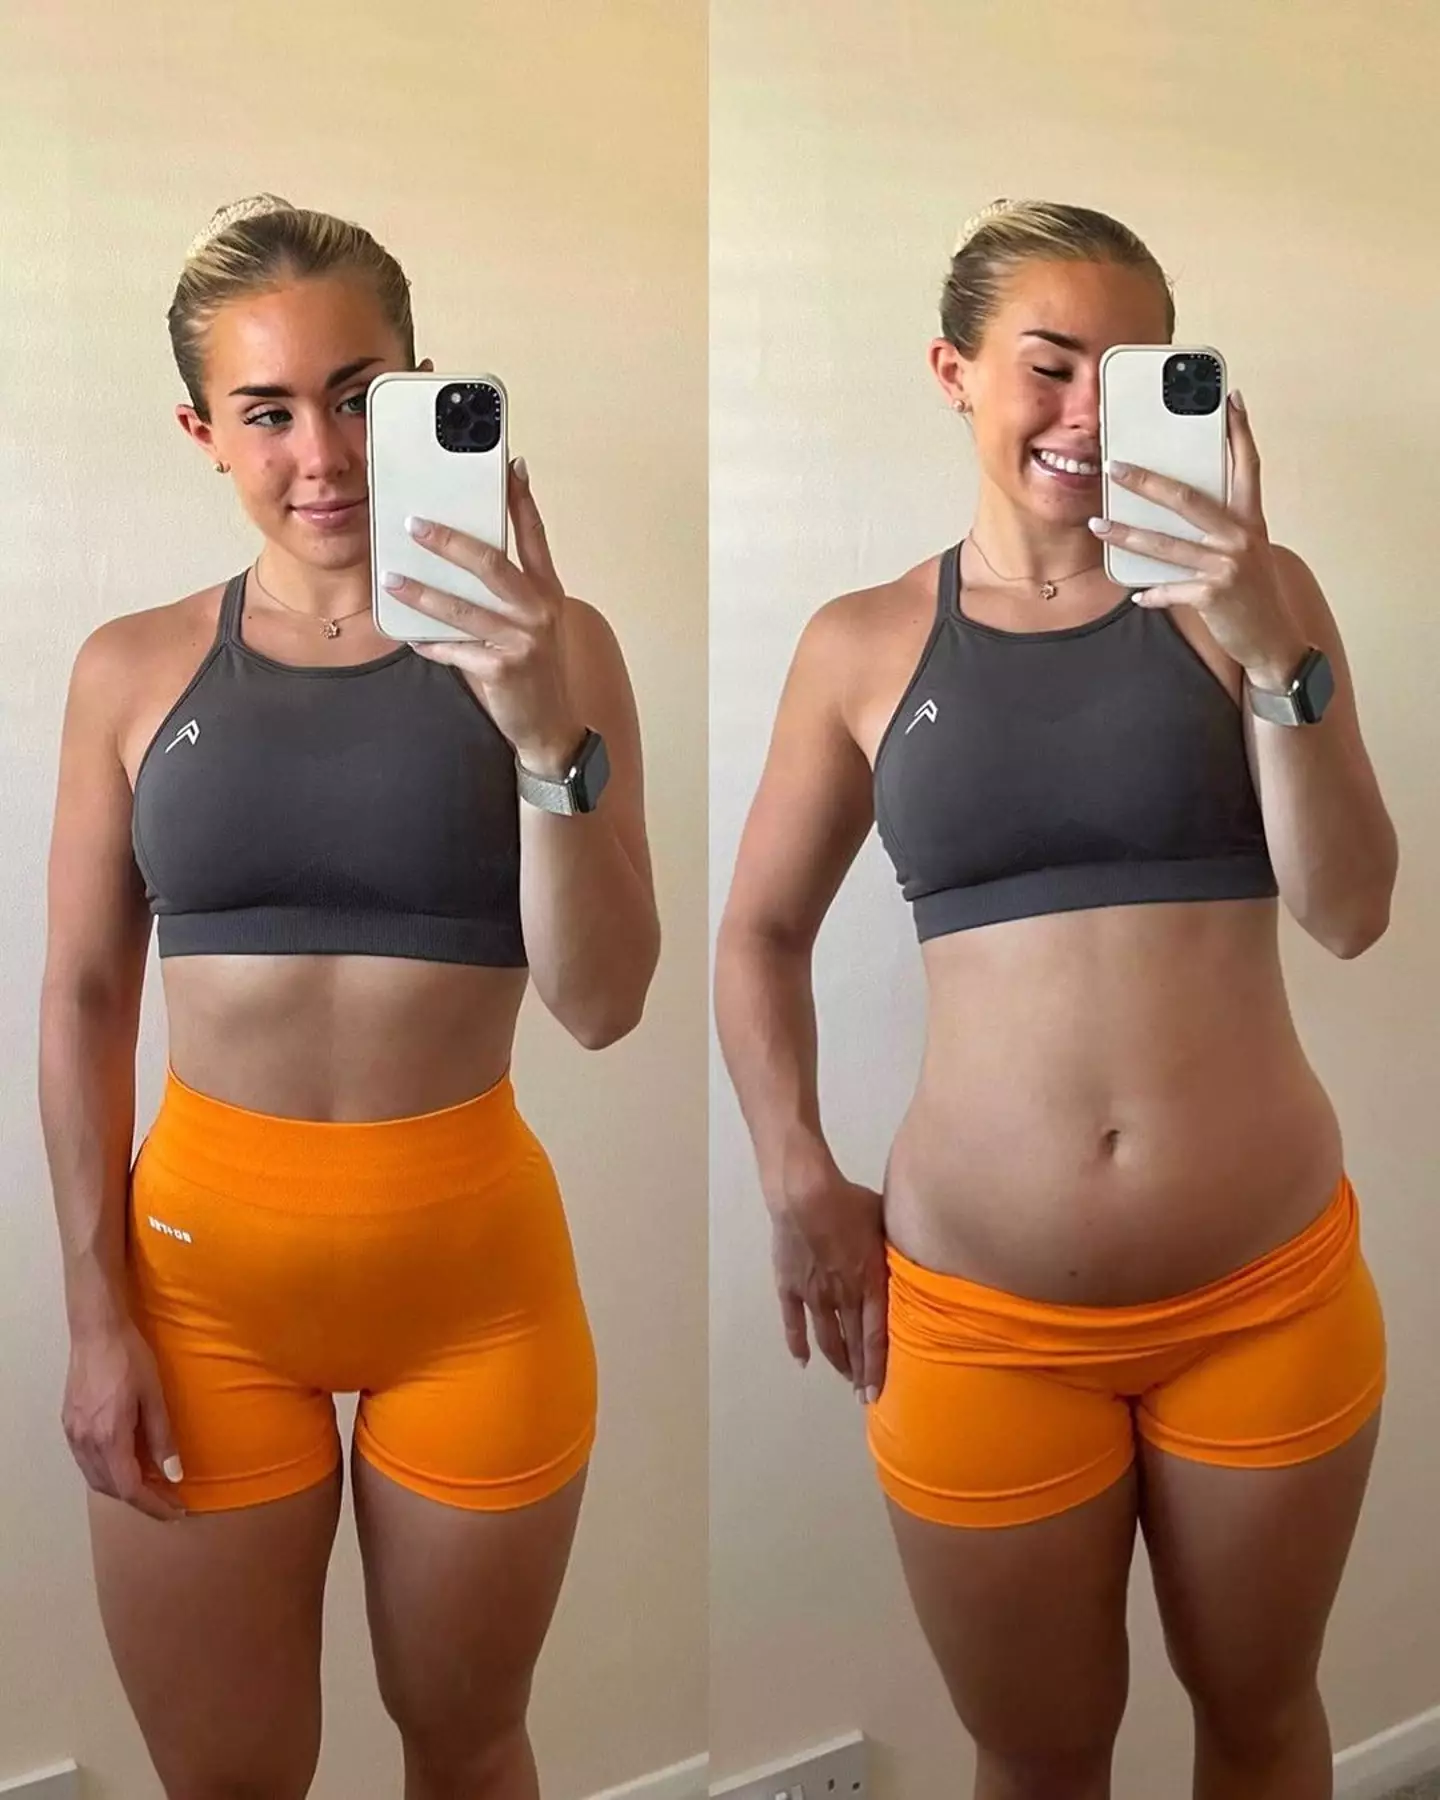 One fitness coach has shared the truth about what's really at play behind Instagram body snaps.